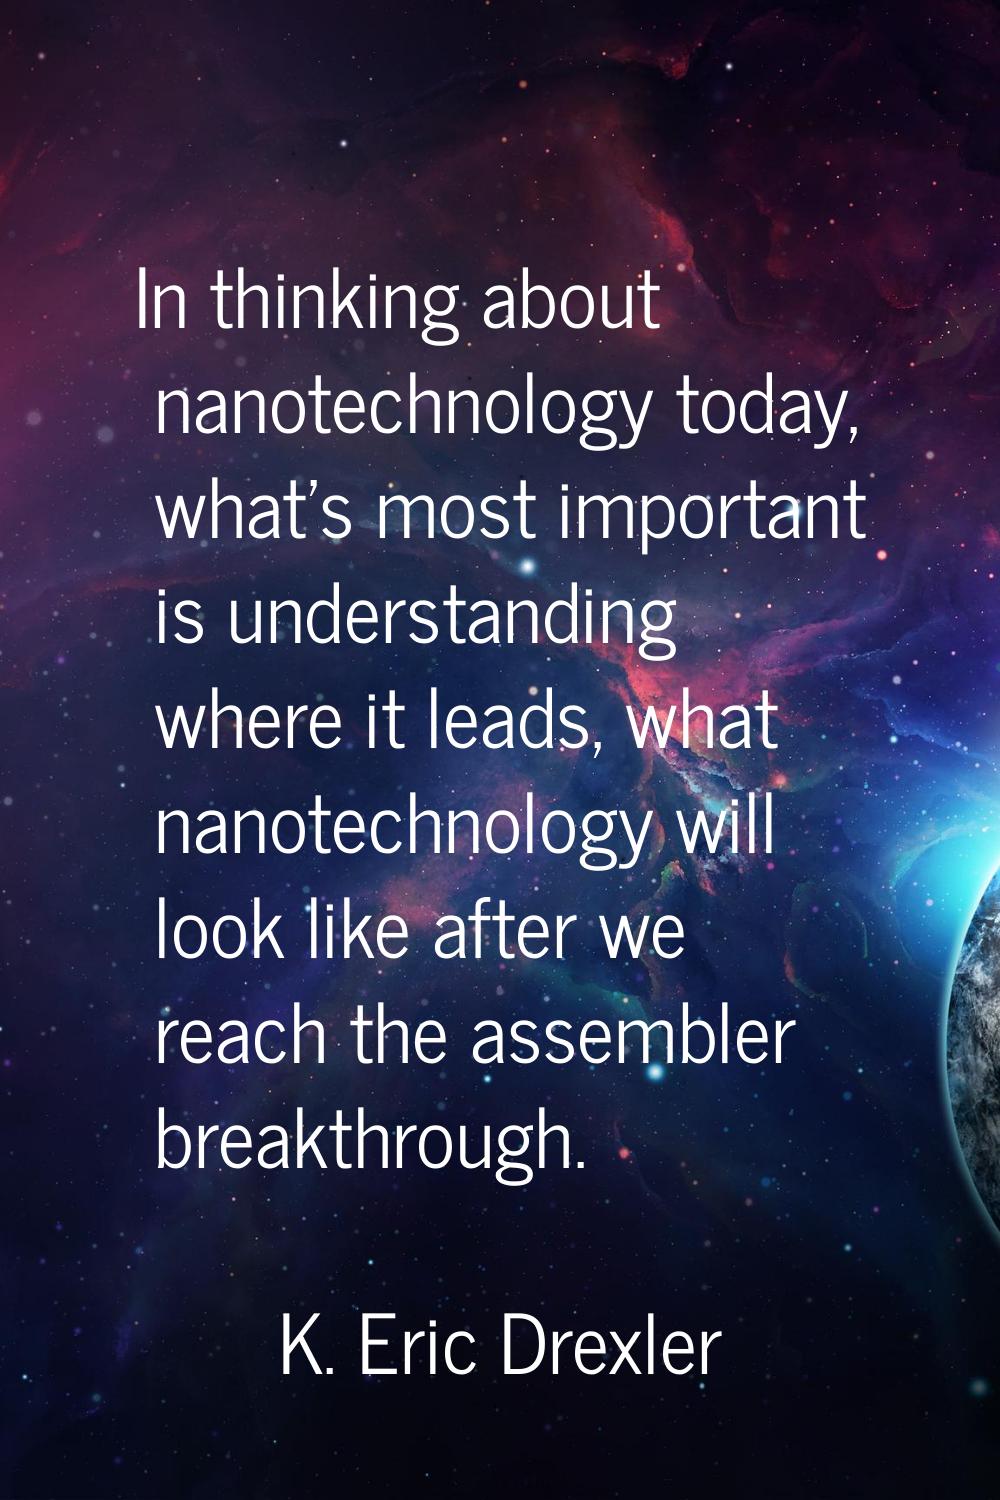 In thinking about nanotechnology today, what's most important is understanding where it leads, what